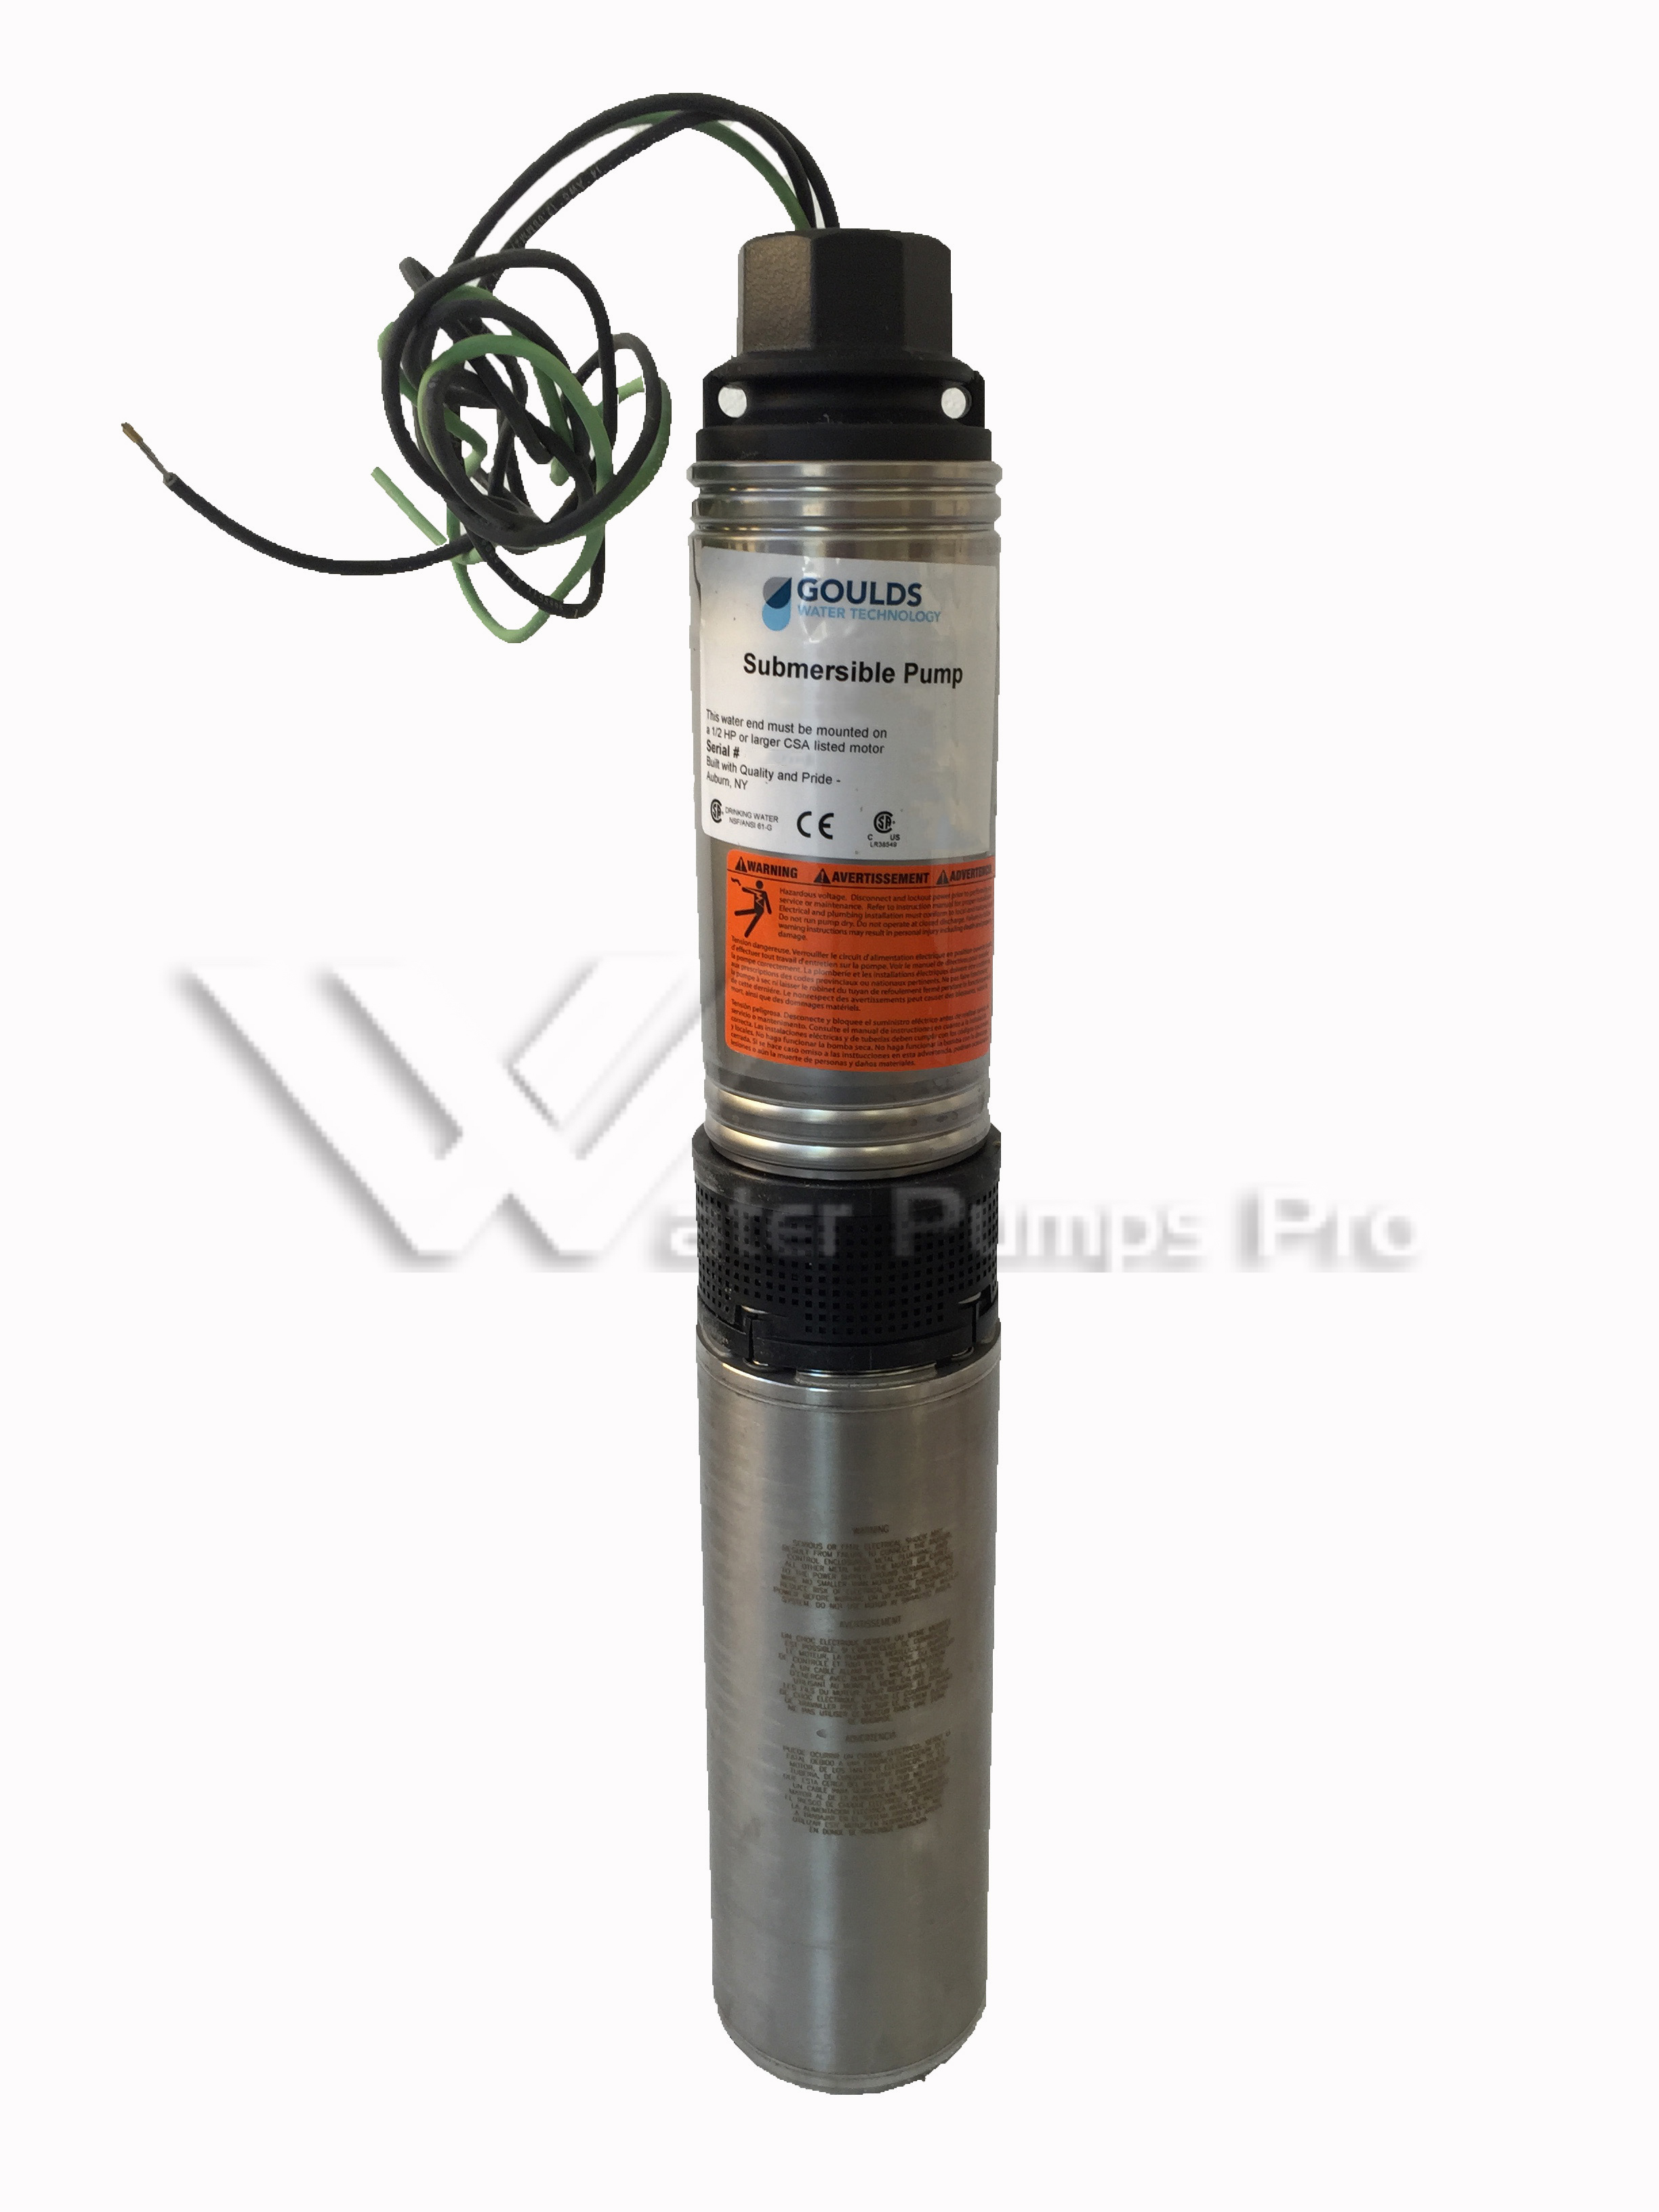 Goulds 10HS05422C Submersible Water Well Pump 1/2HP 230V 2Wire